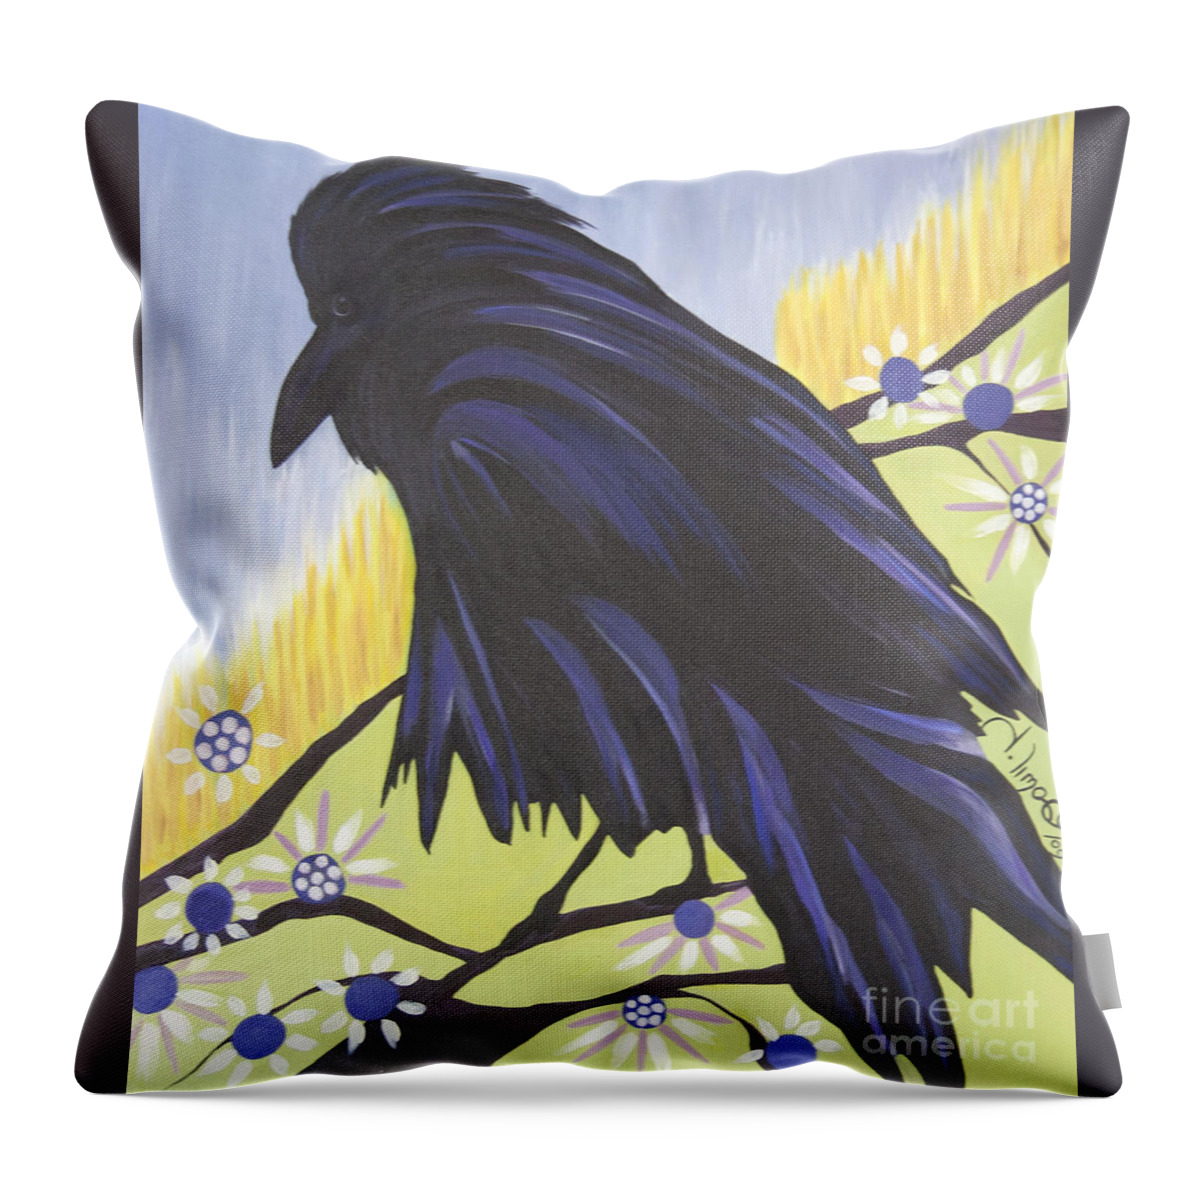 #raven #bird #raven #nature #treebranchs #photography #fineart #art #images #acryliconcanvas #reflection Throw Pillow featuring the painting Reflection by Jacquelinemari